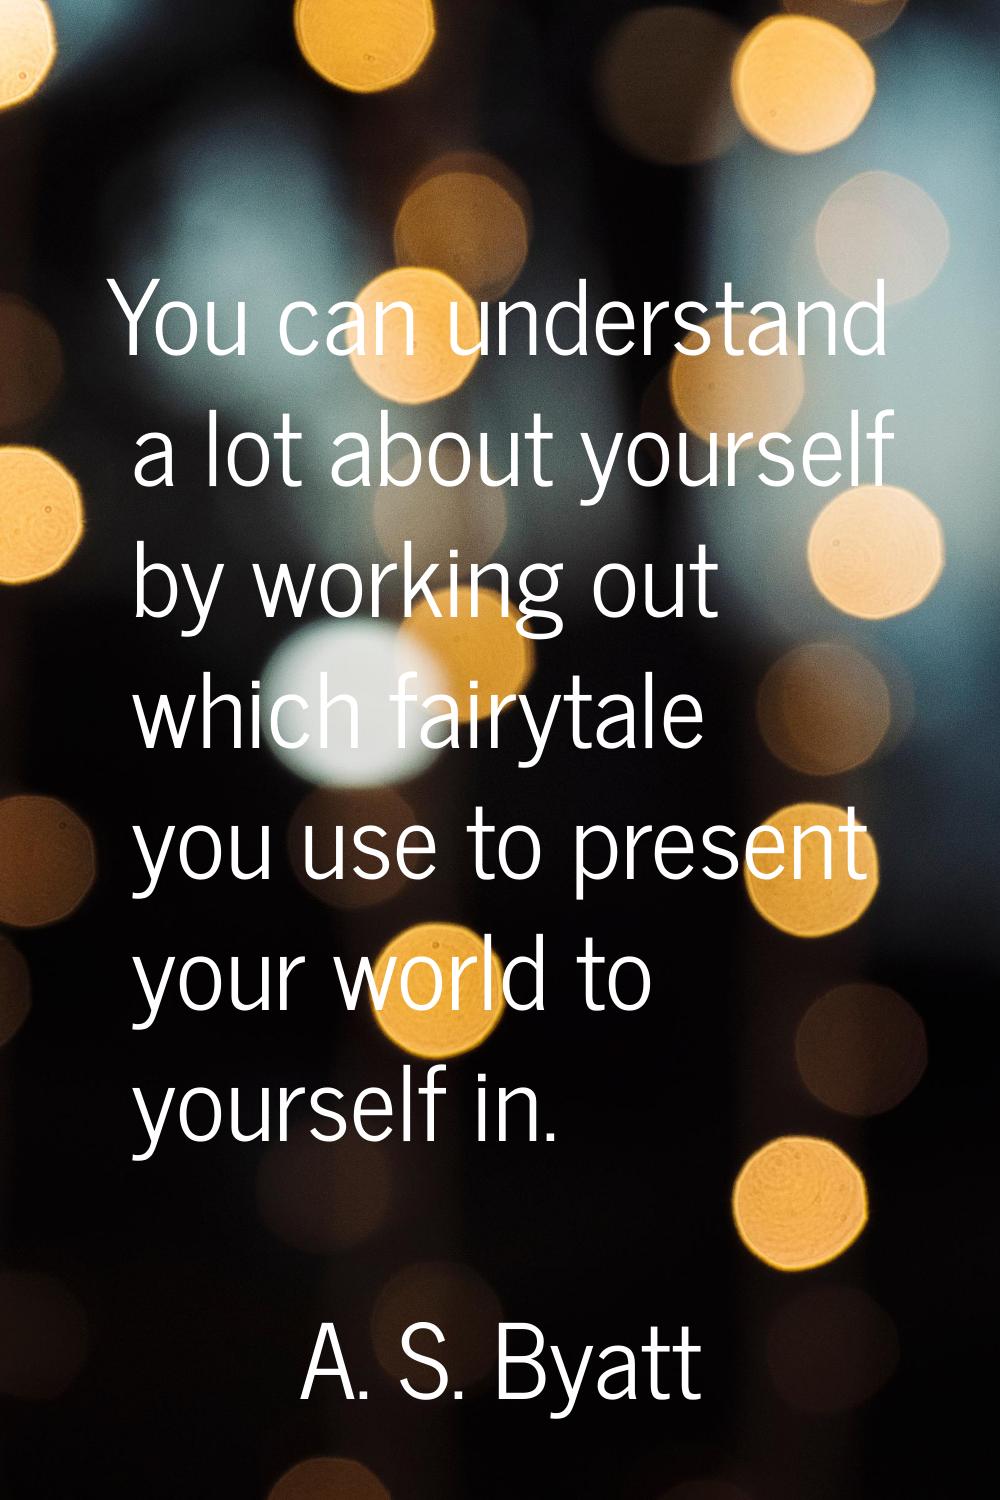 You can understand a lot about yourself by working out which fairytale you use to present your worl